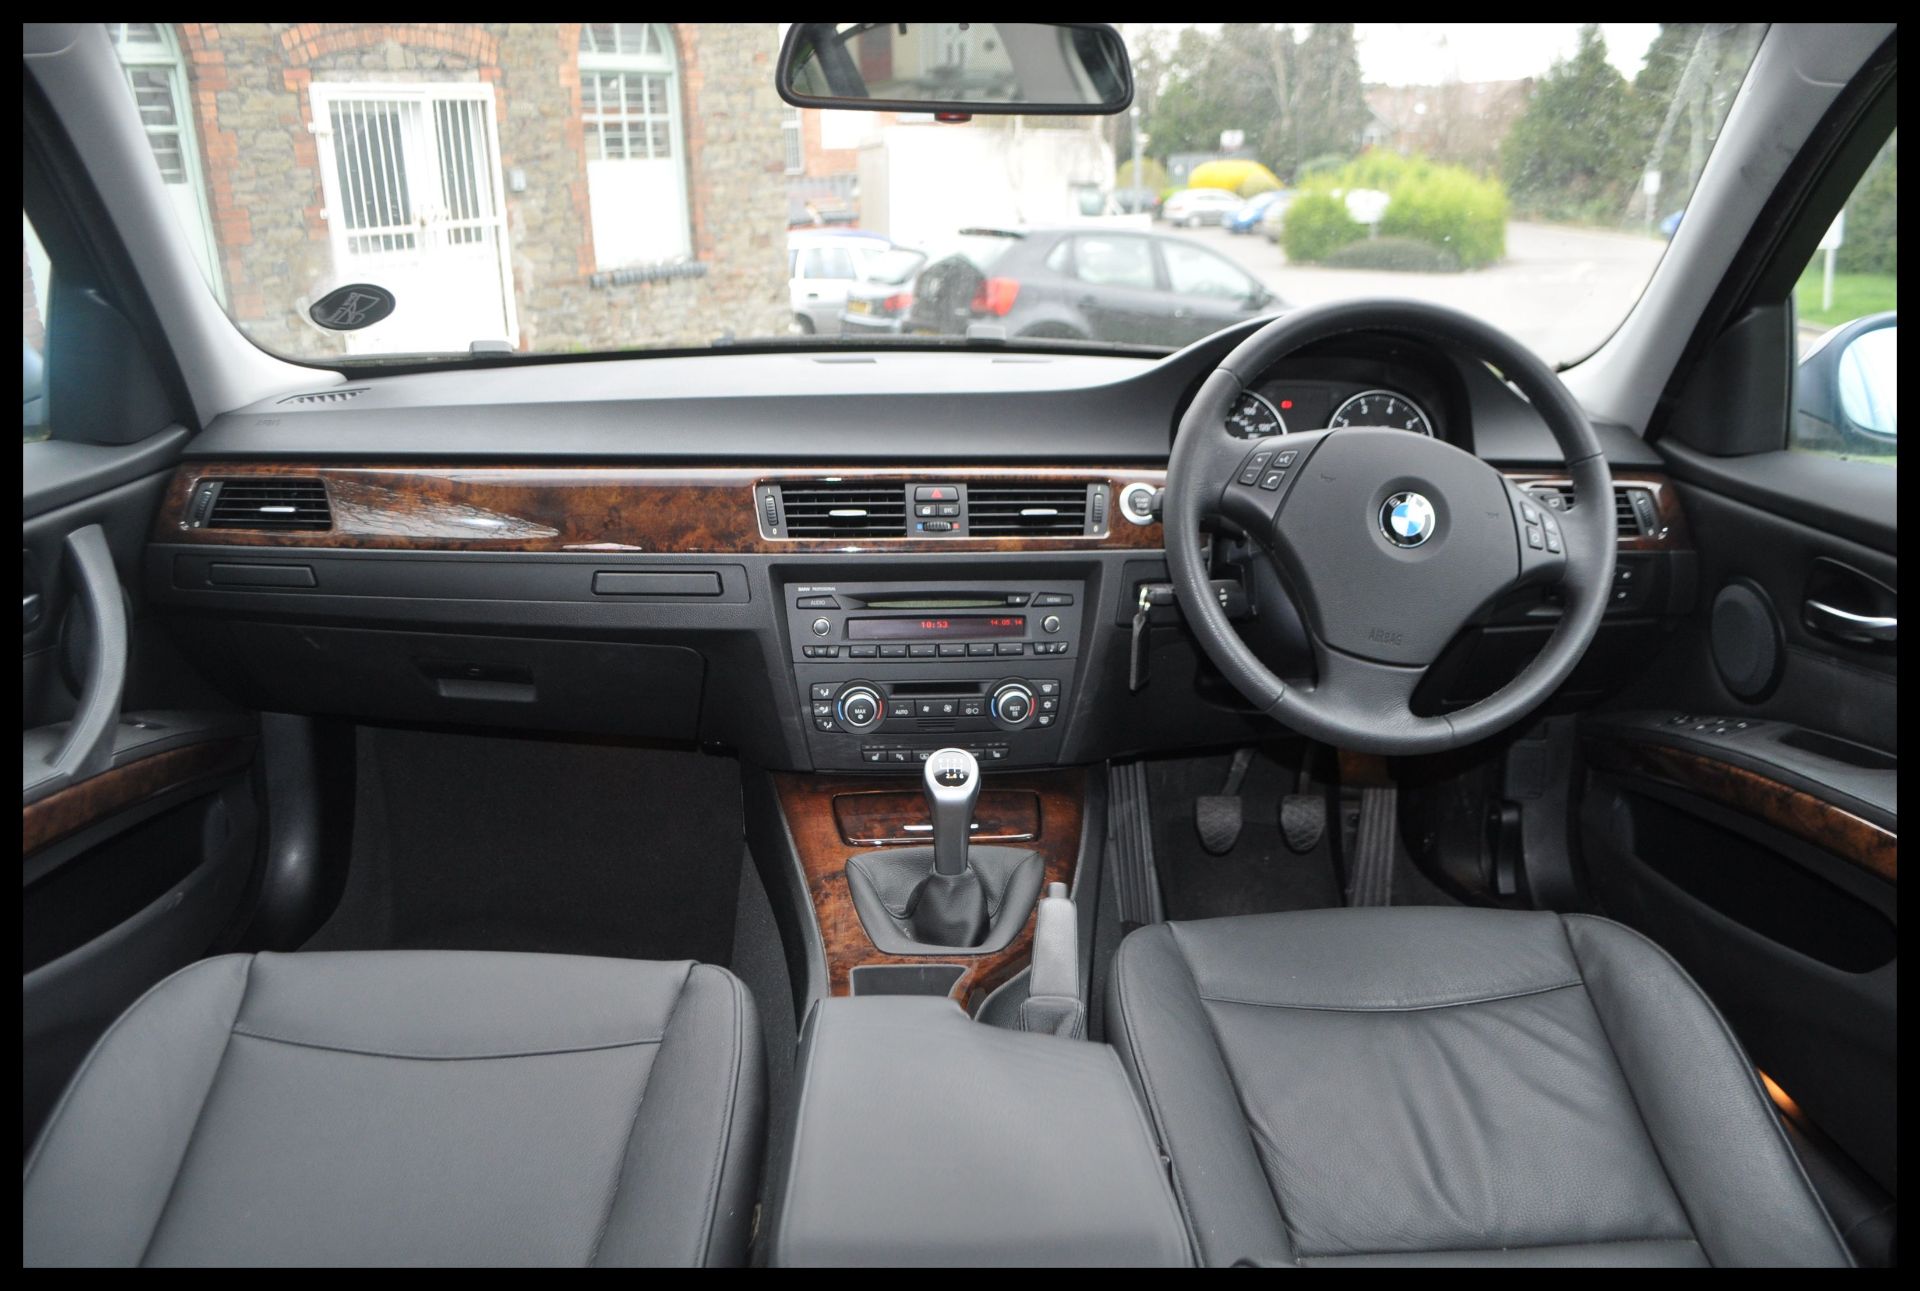 A 3 series 318i BMW five door saloon car. WN57 YGH - Image 8 of 12